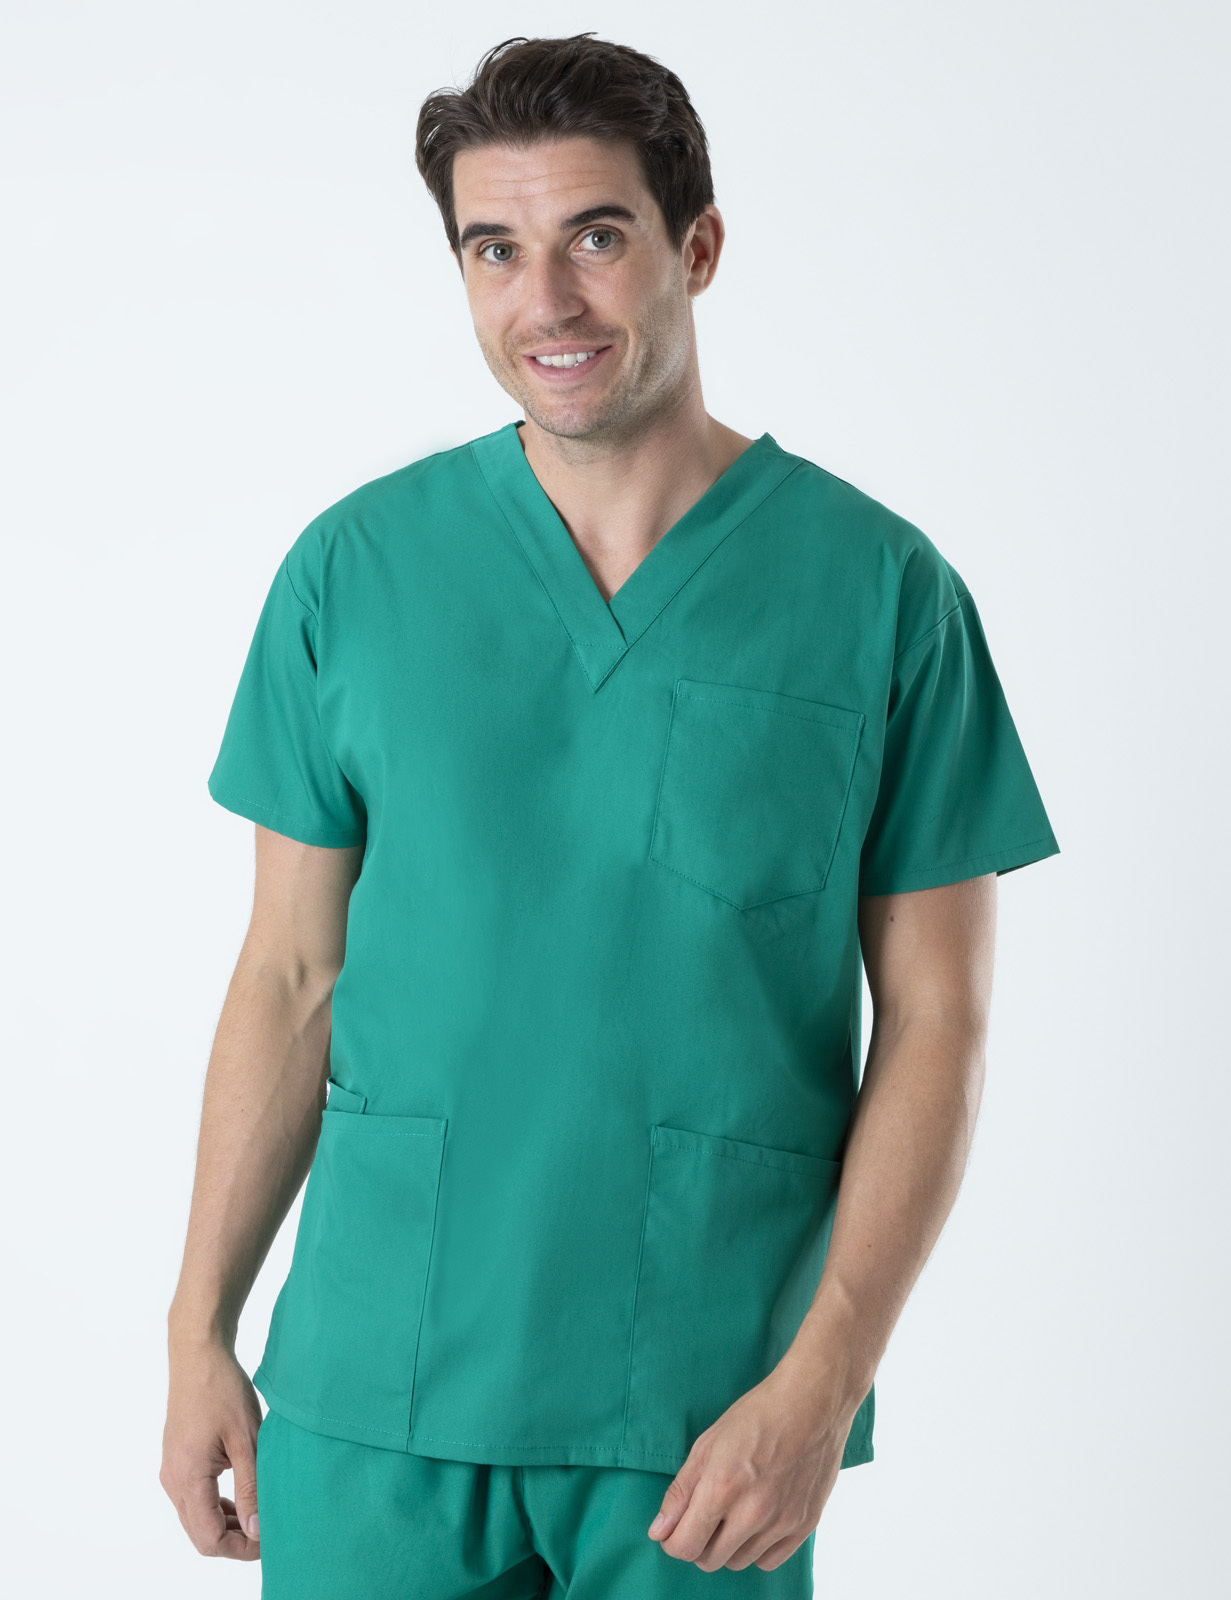 Canberra Hospital - Medical Foundation Department (4 Pocket Scrub Top and Cargo Pants in Hunter incl Logos)